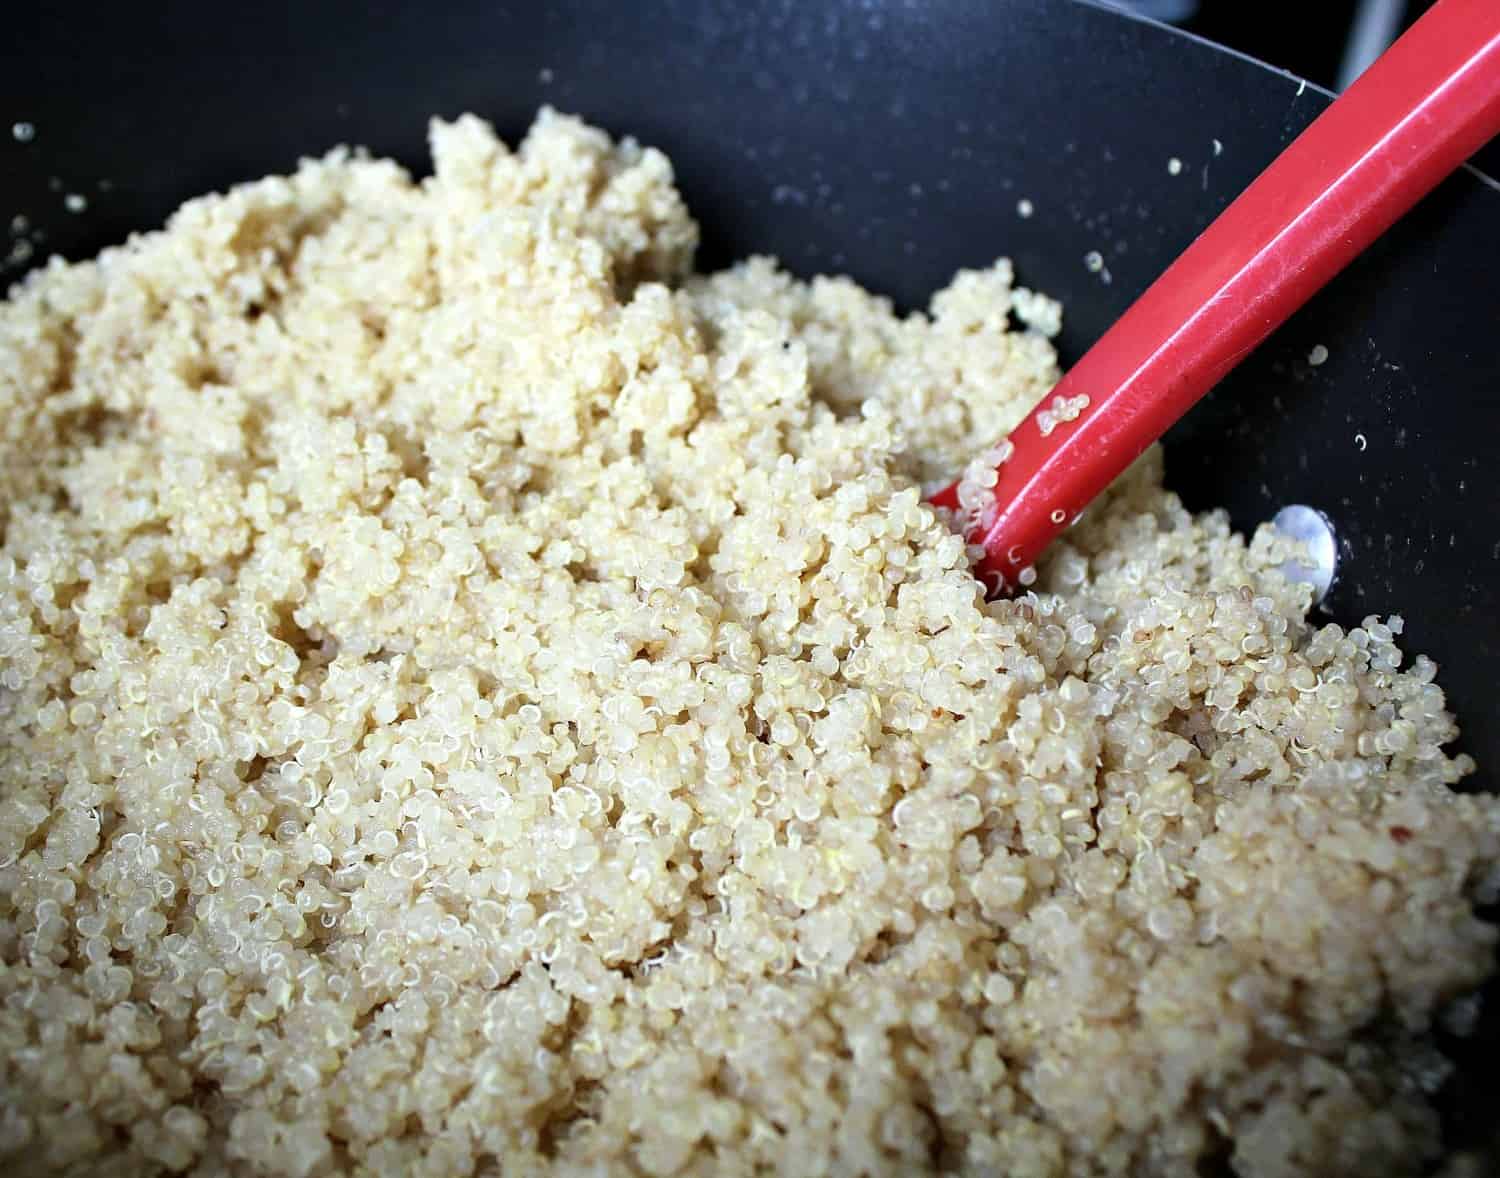 Closeup of cooked quinoa in pan, with red spoon inserted.